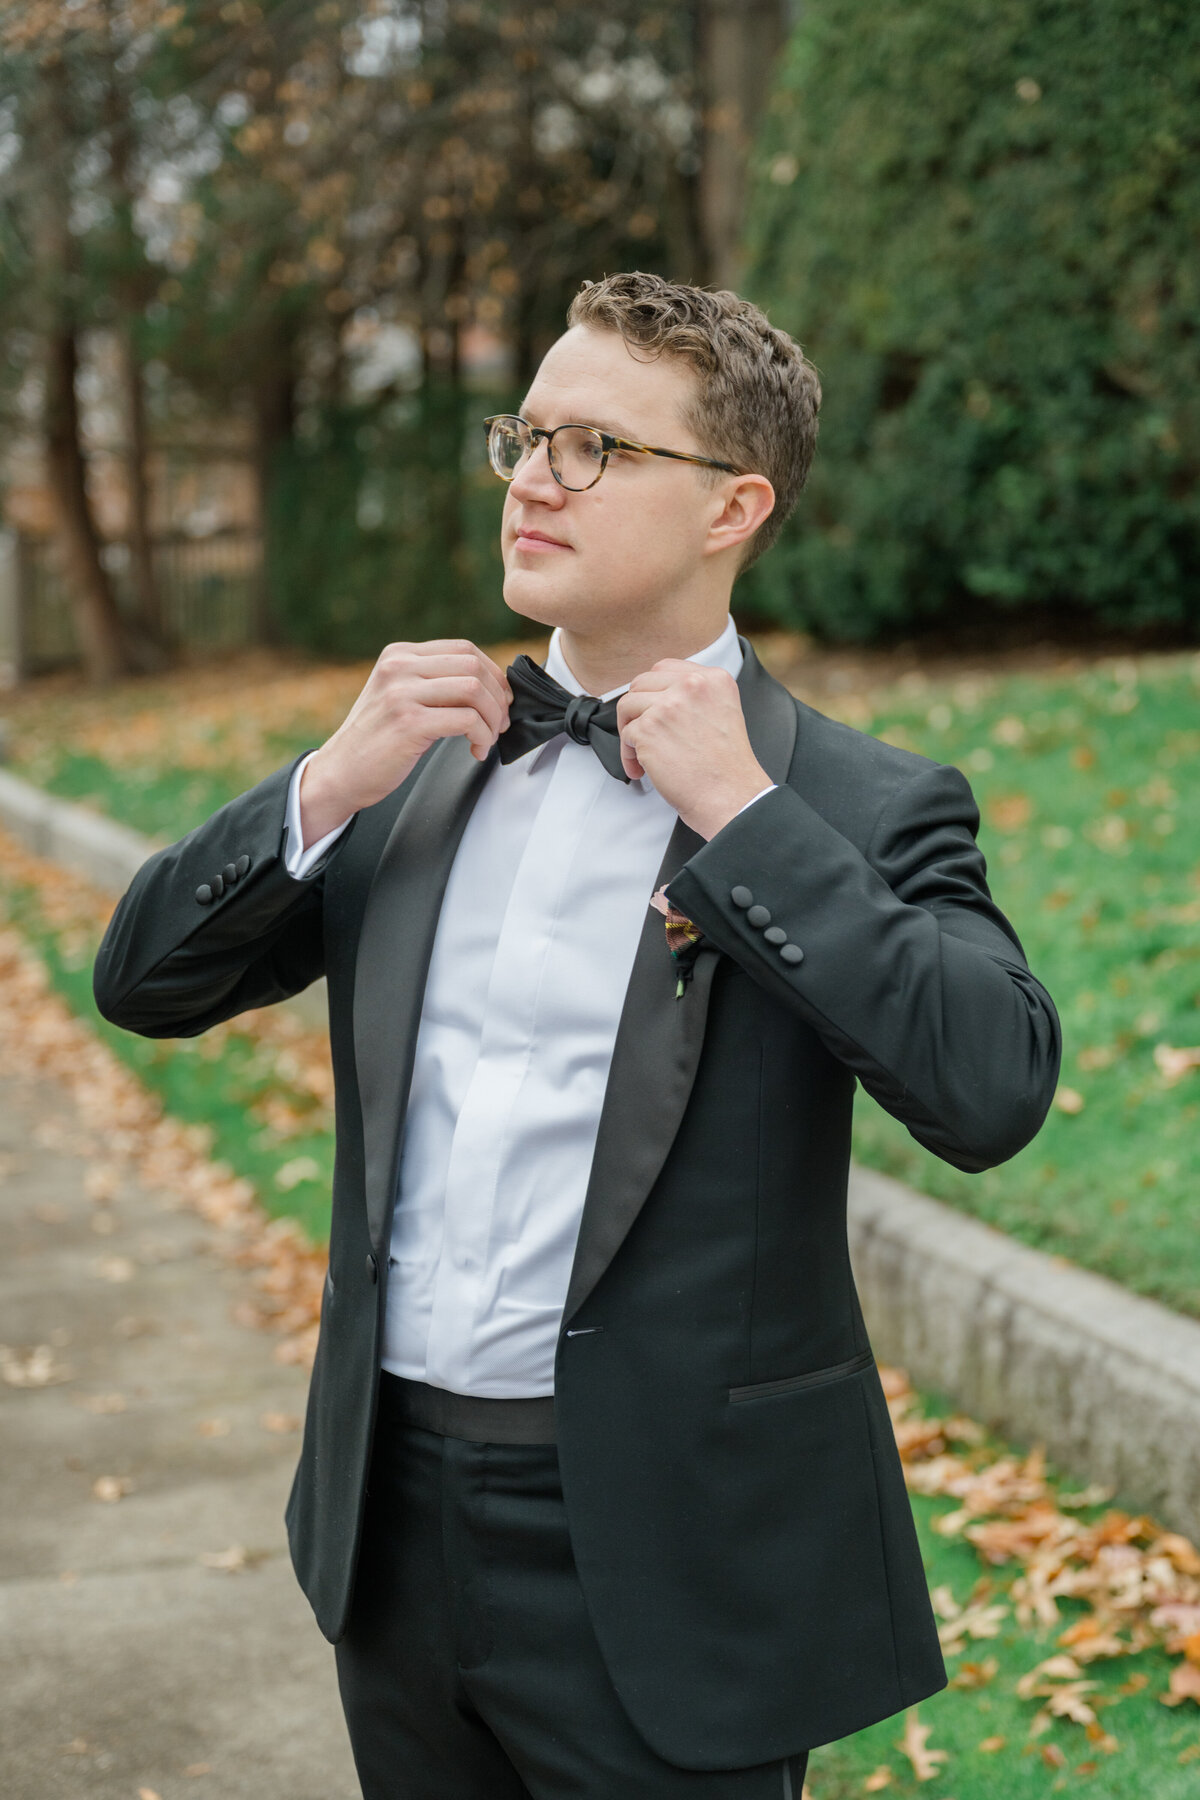 elevate-this-classic-groom-style-with-black-bow-tie